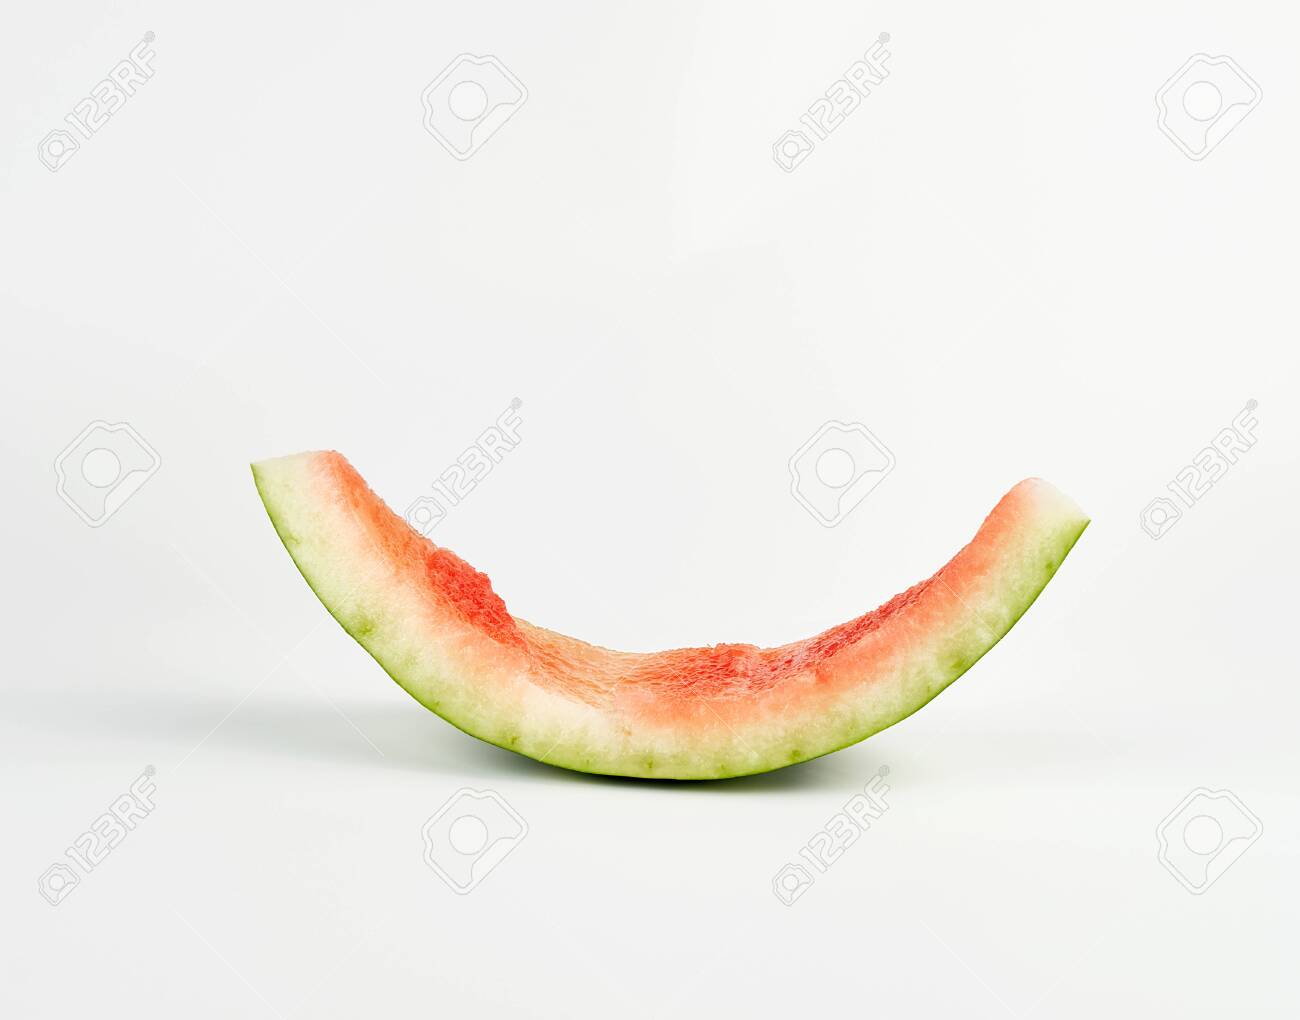 Stub Of Red Ripe Round Watermelon On A White Background Close